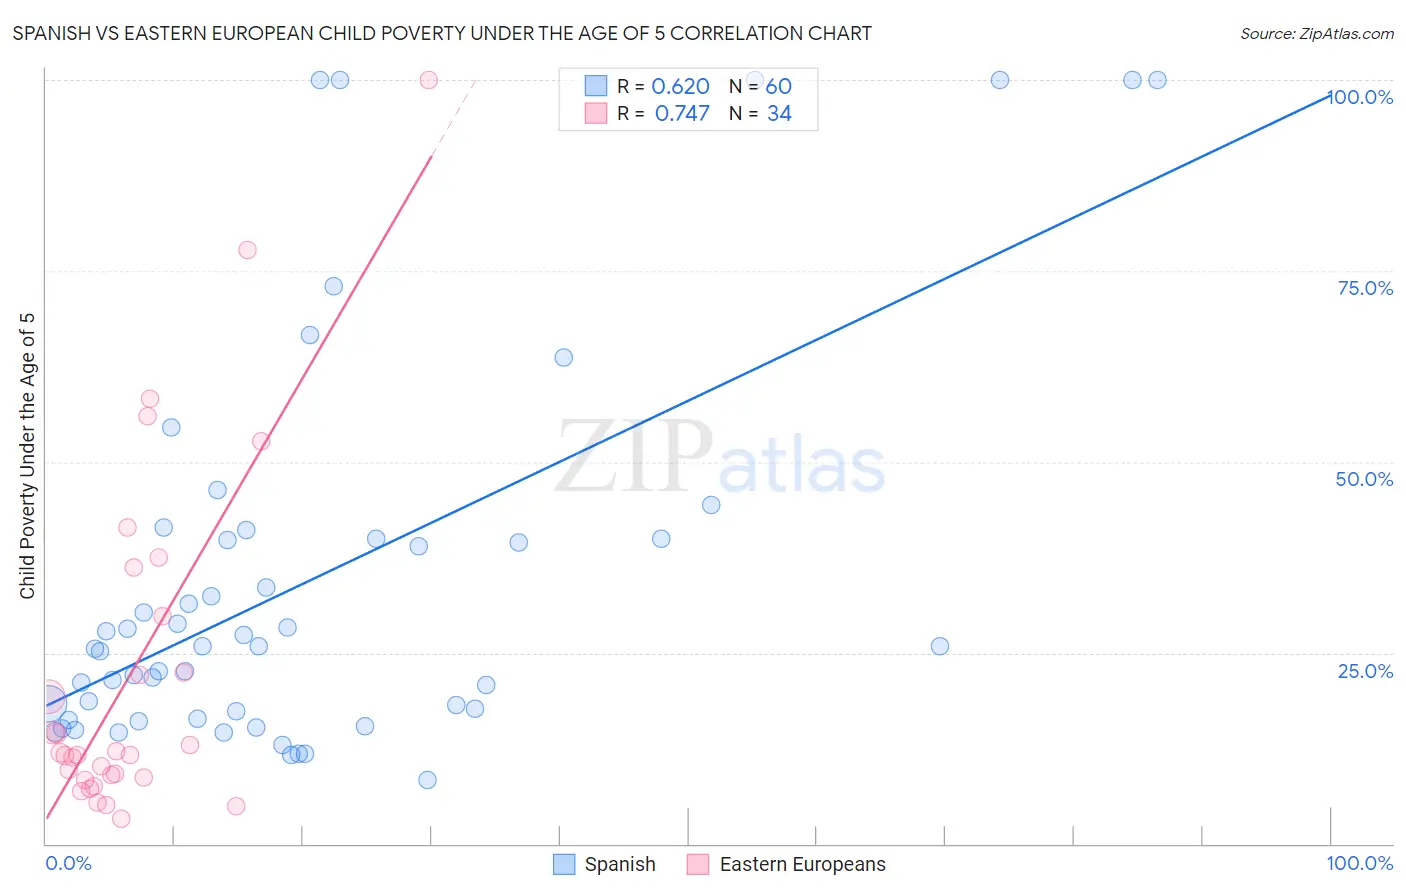 Spanish vs Eastern European Child Poverty Under the Age of 5